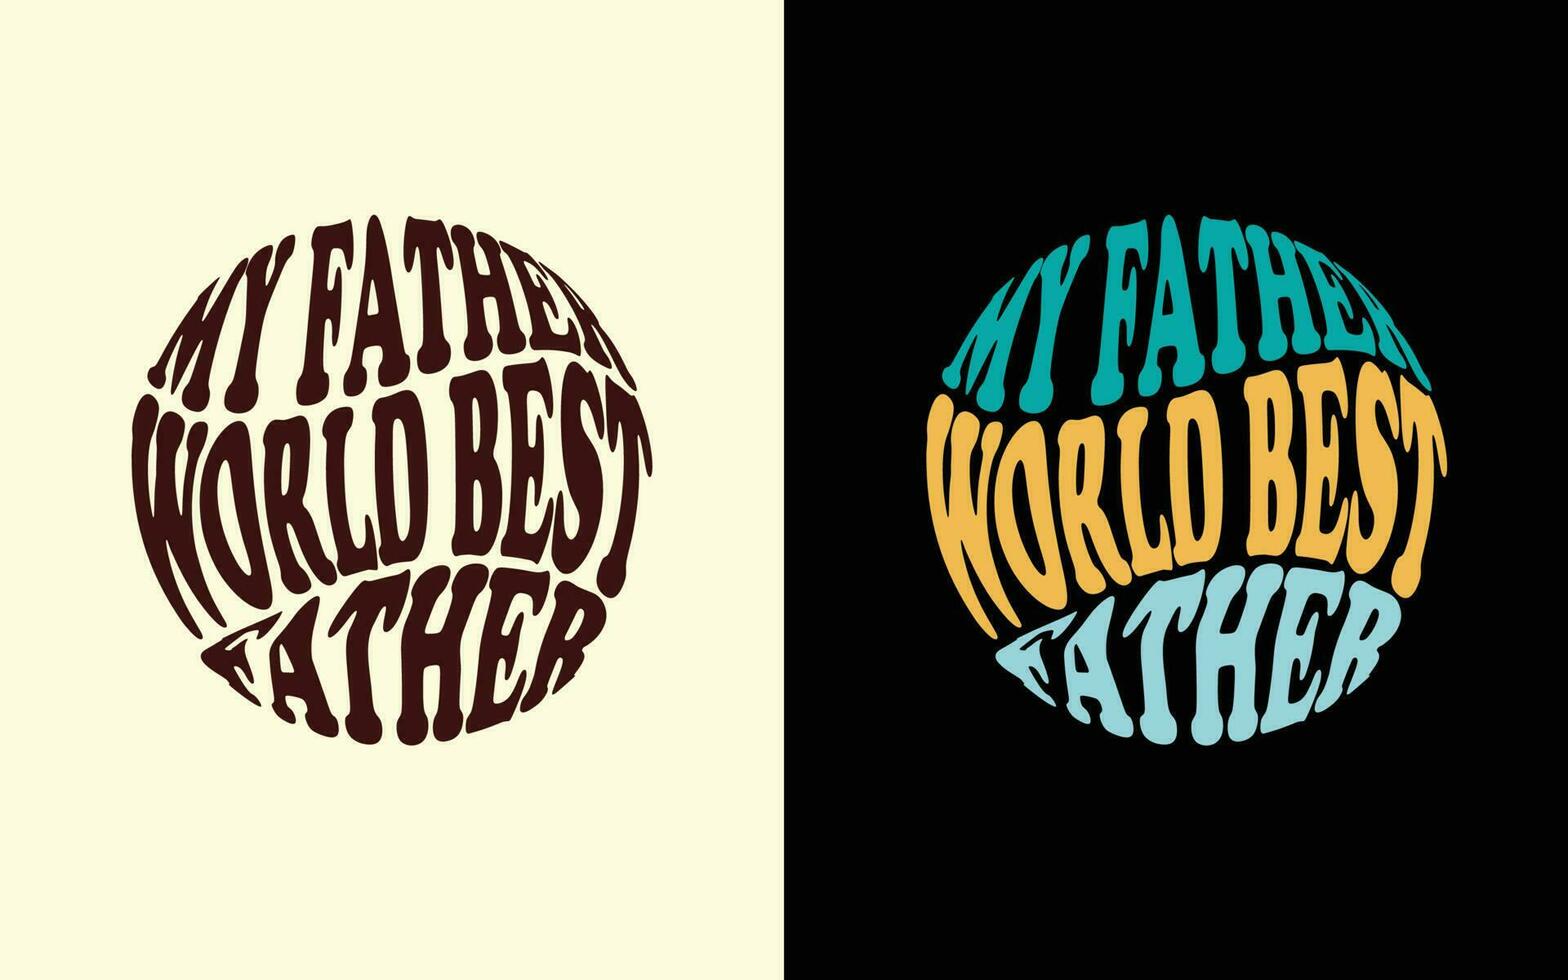 My Father world best father template vector